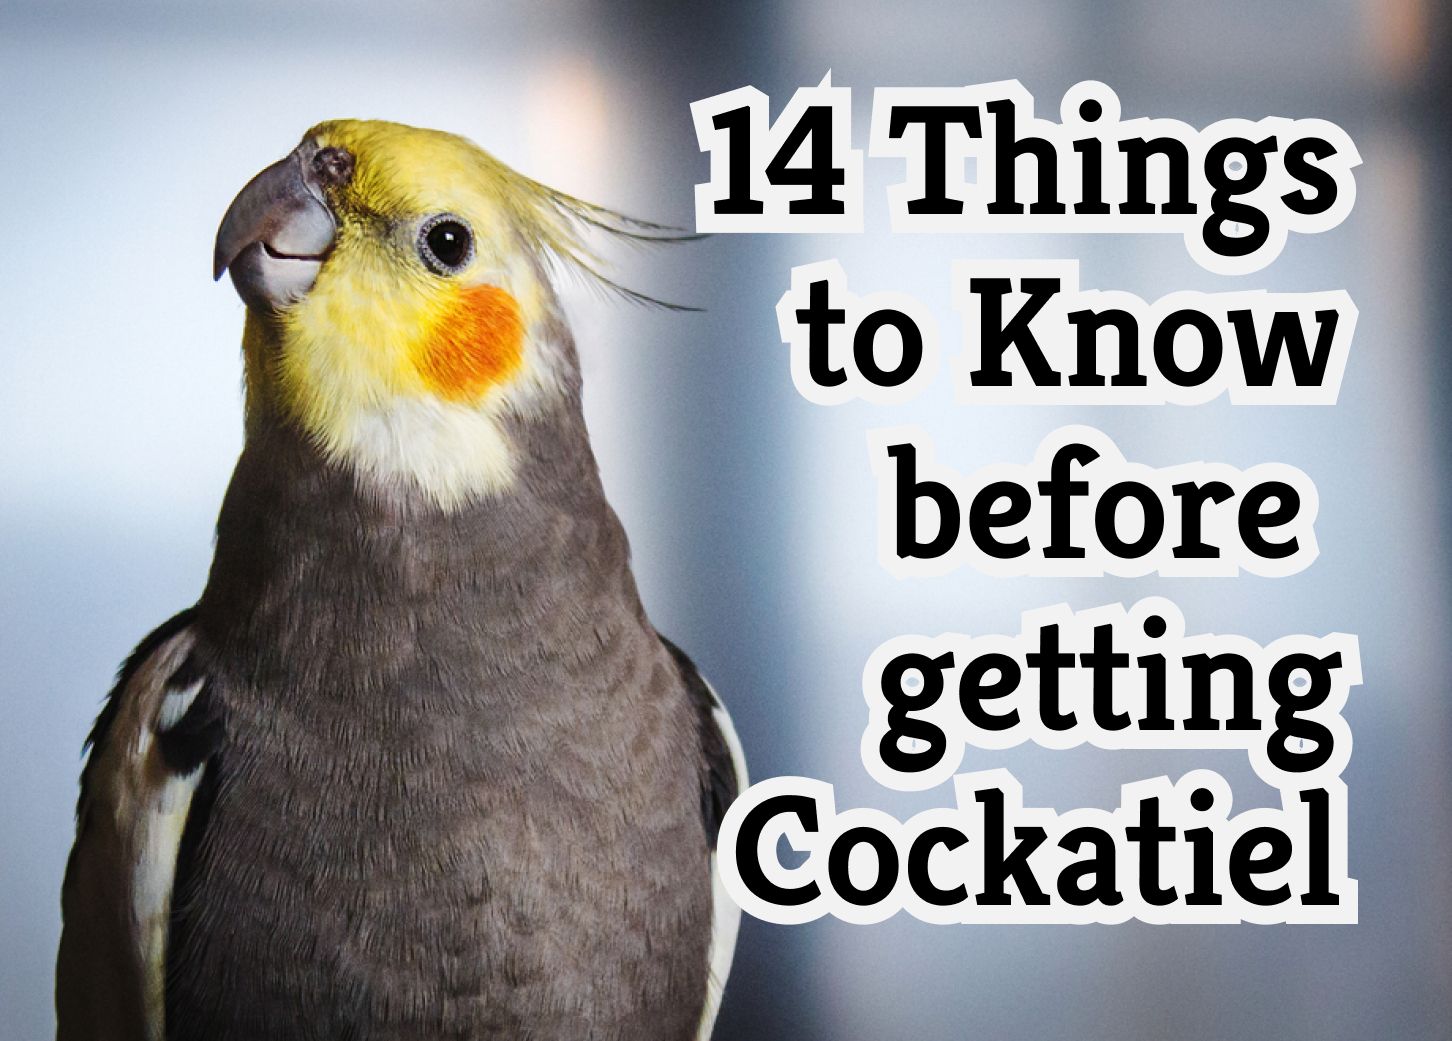 14 Things to Know Before Getting a Cockatiel